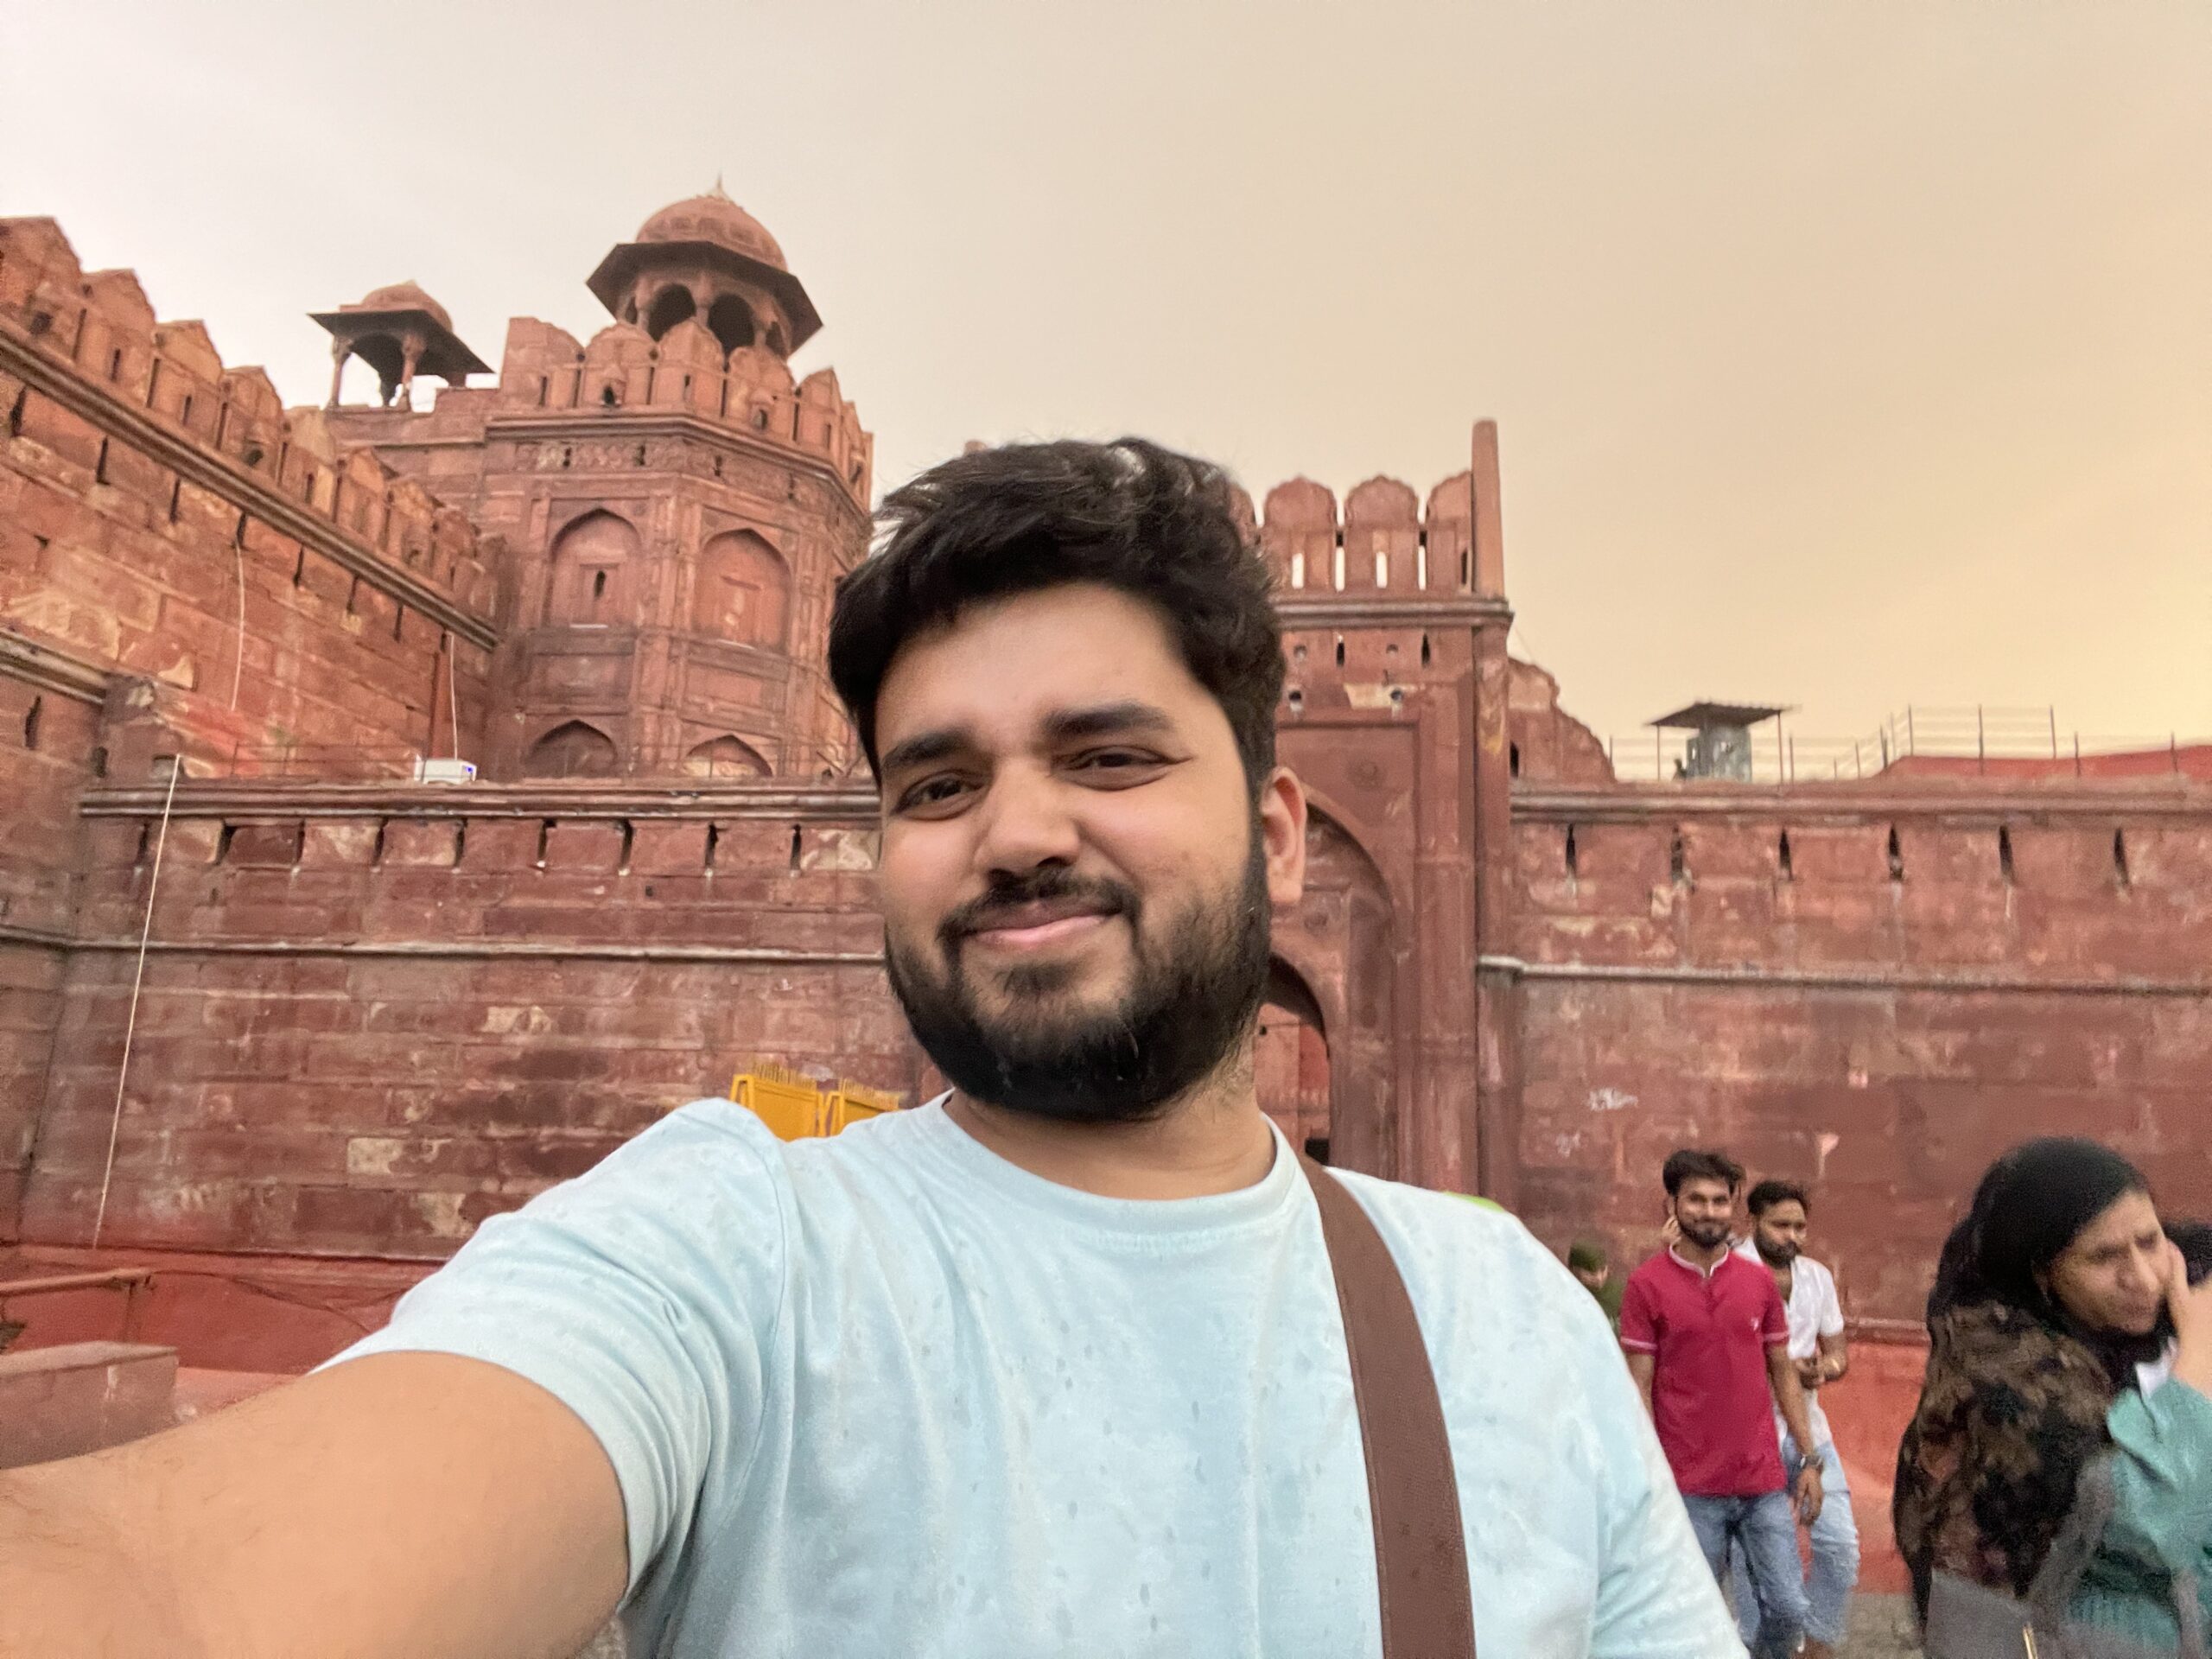 Tech Influencer from Patna Shares Incredible Story of Tracing Lost iPhone and Xiaomi CIVI 2 at Delhi’s Jama Masjid